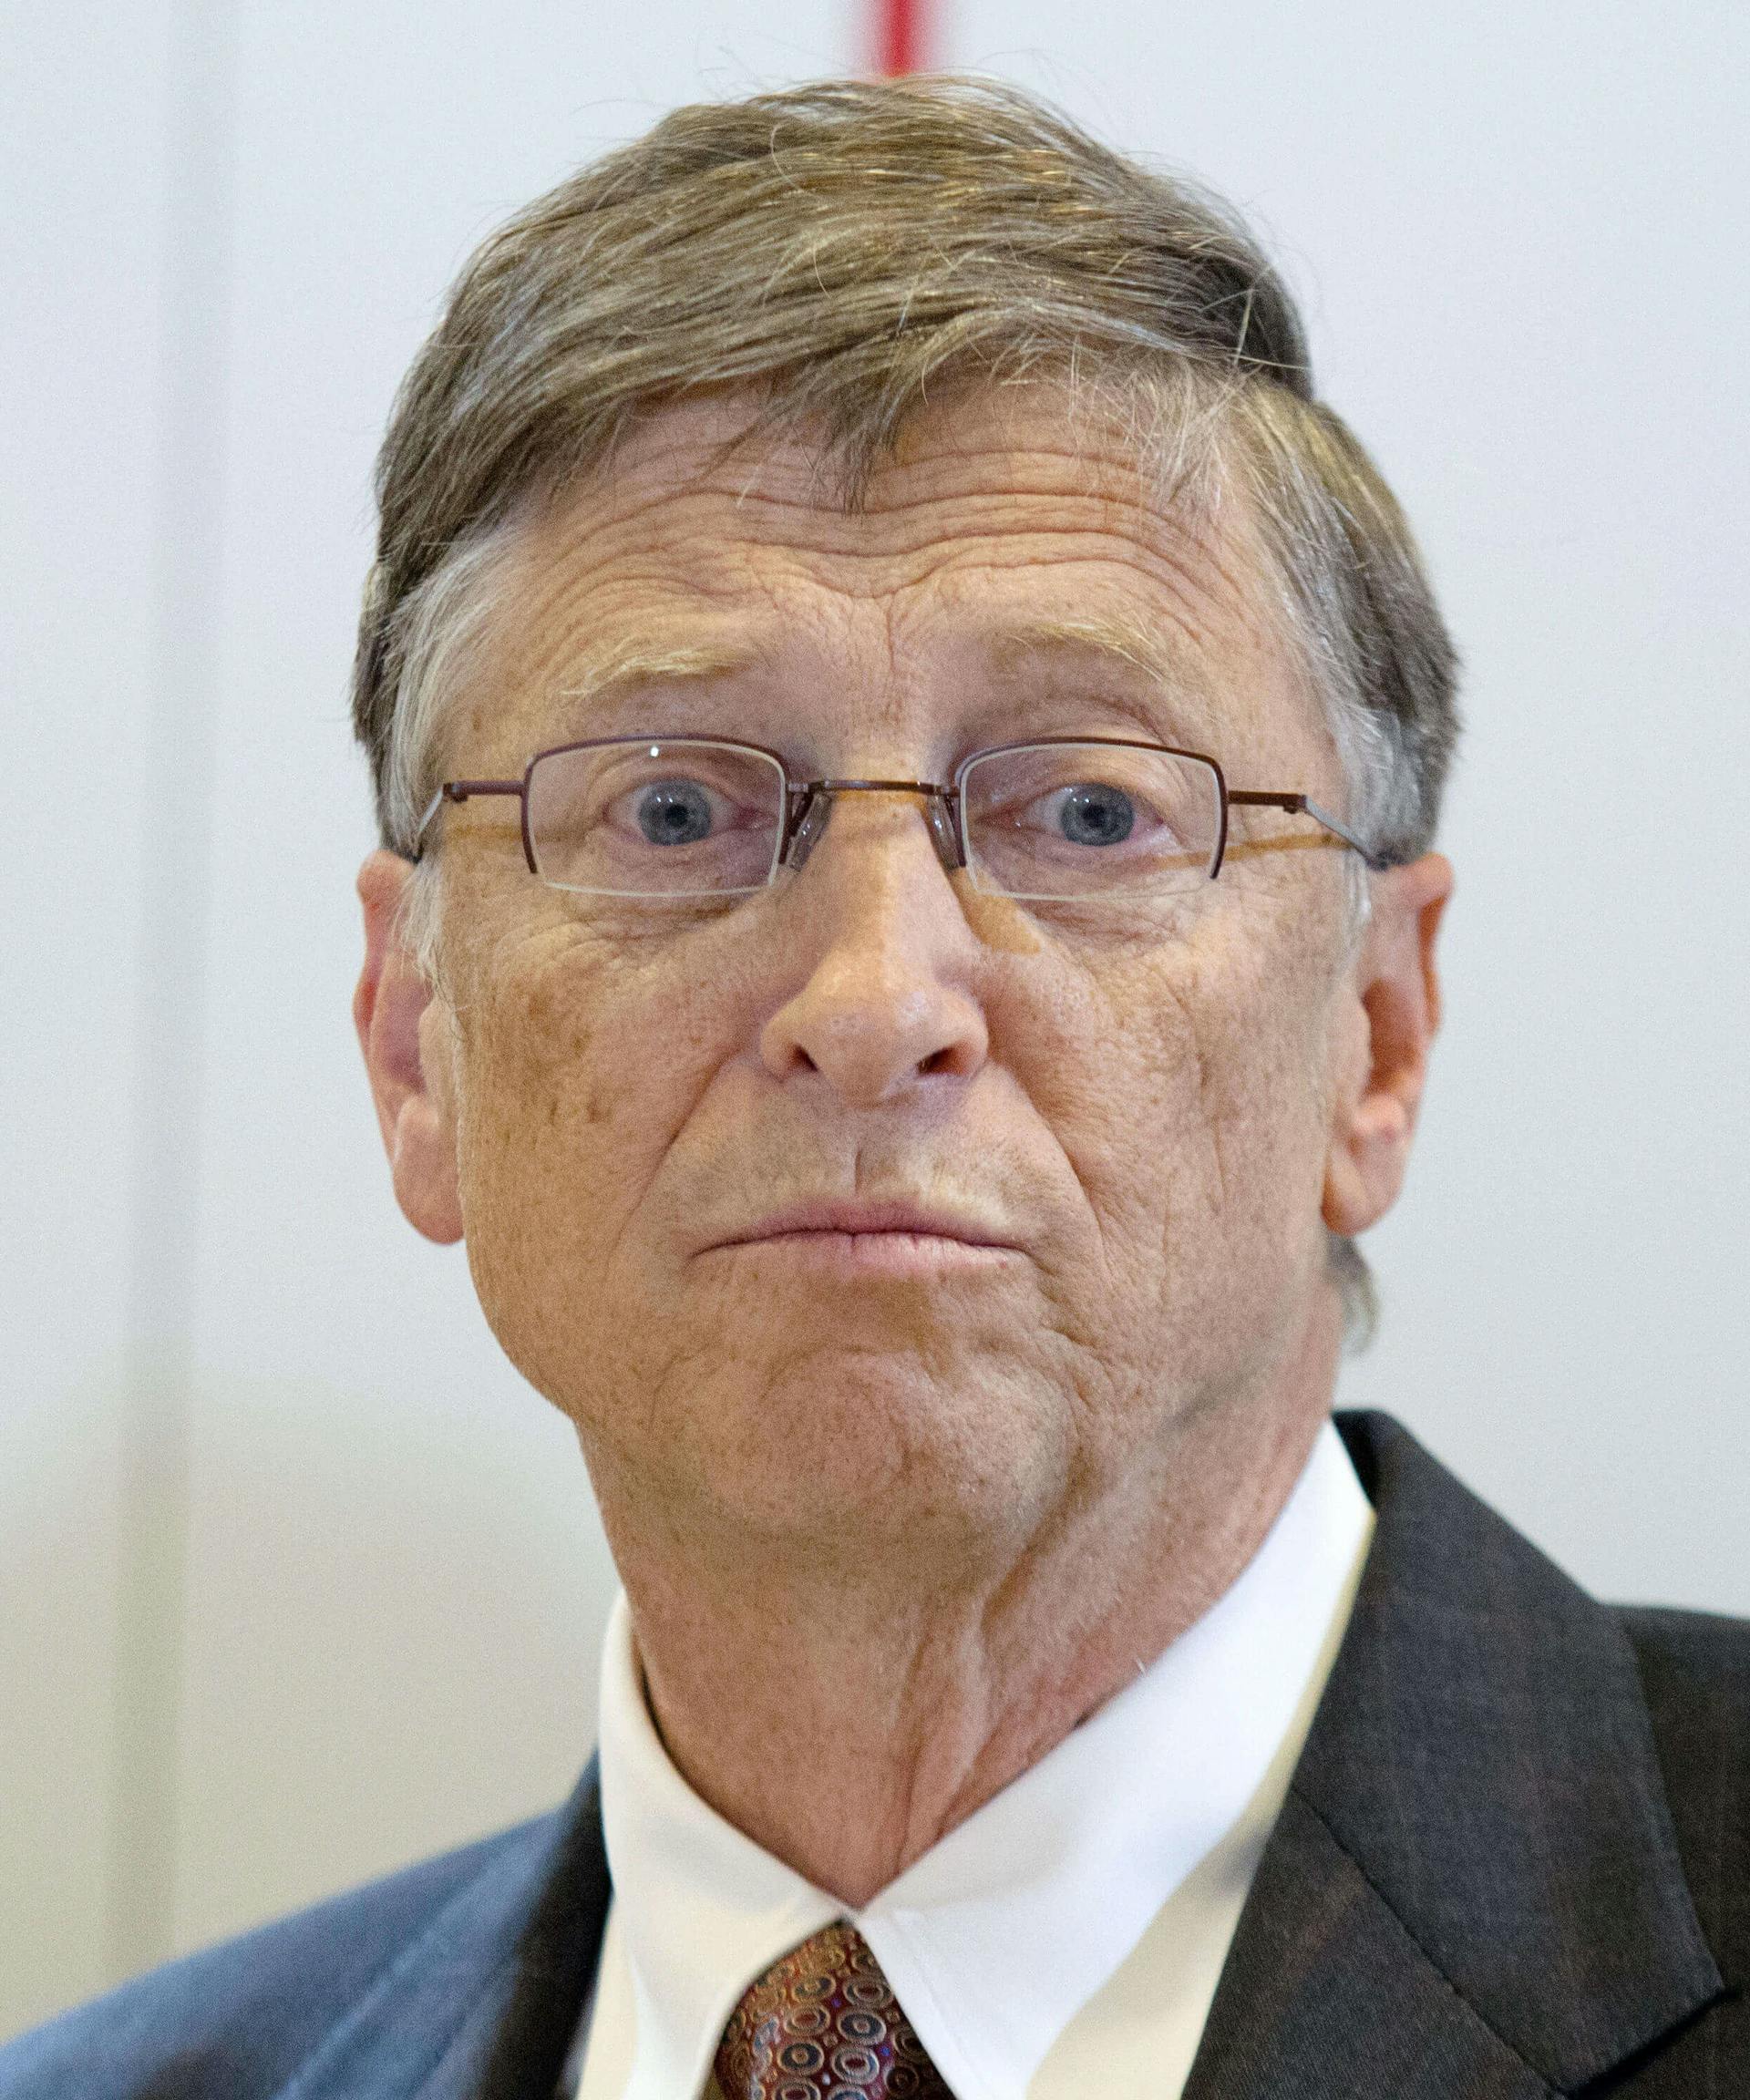 Bill Gates’ Long History Of Problematic Behavior With Women Is Being Revealed